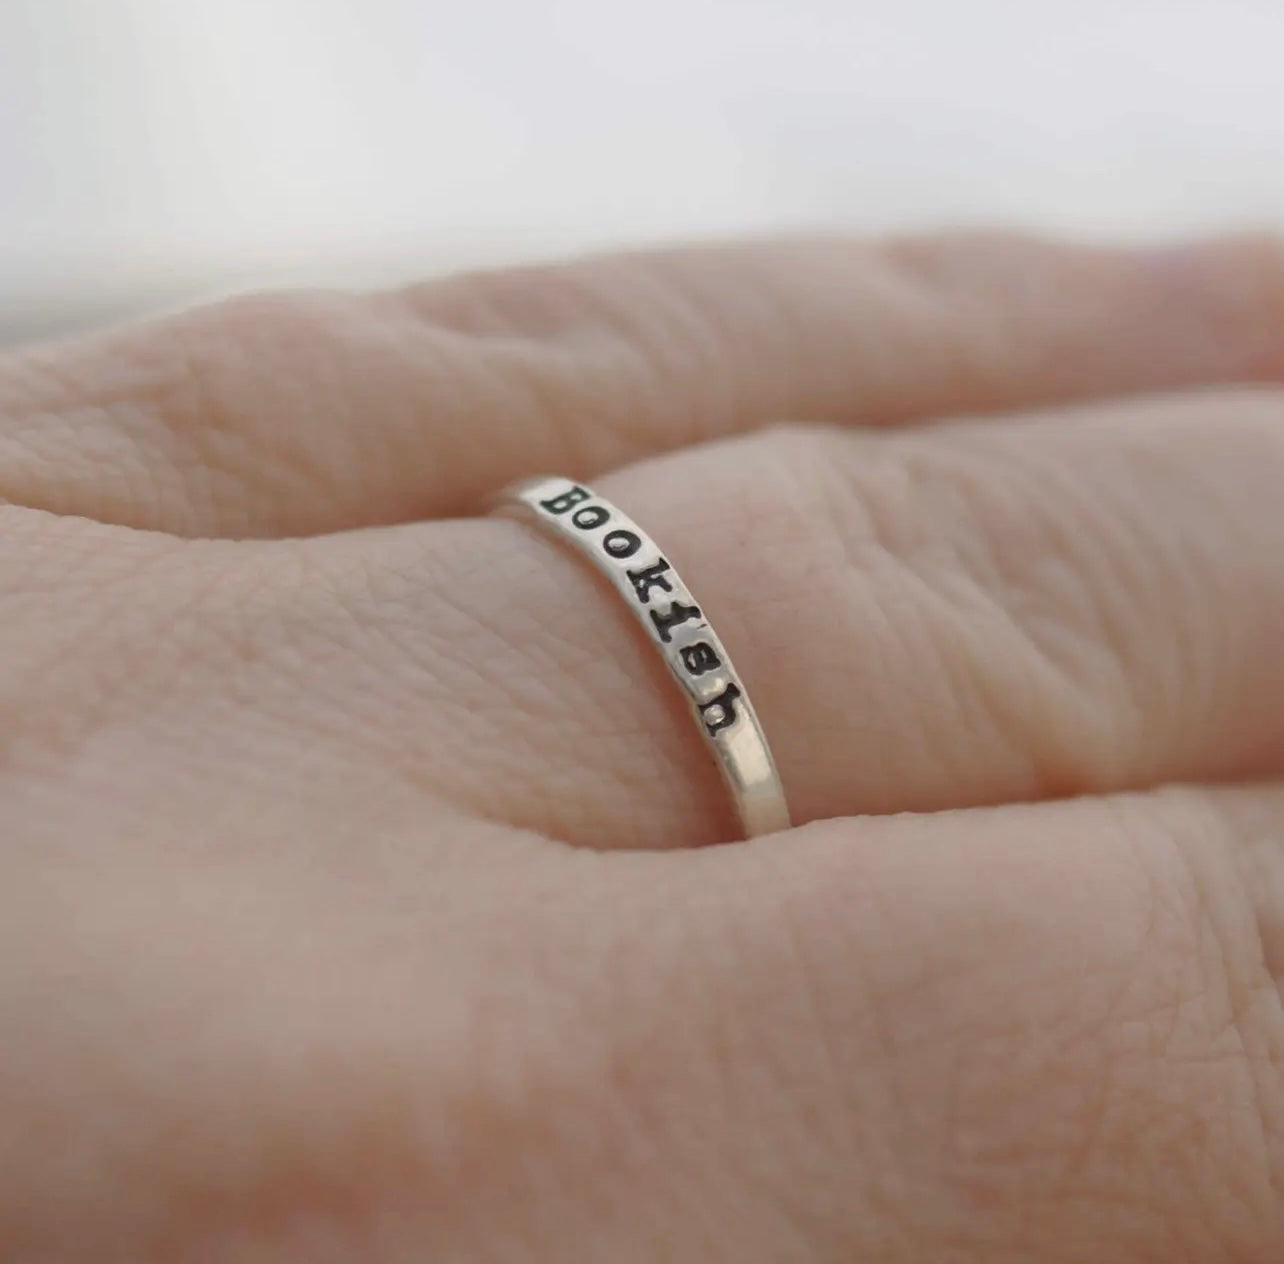 Sterling Silver Bookish Ring